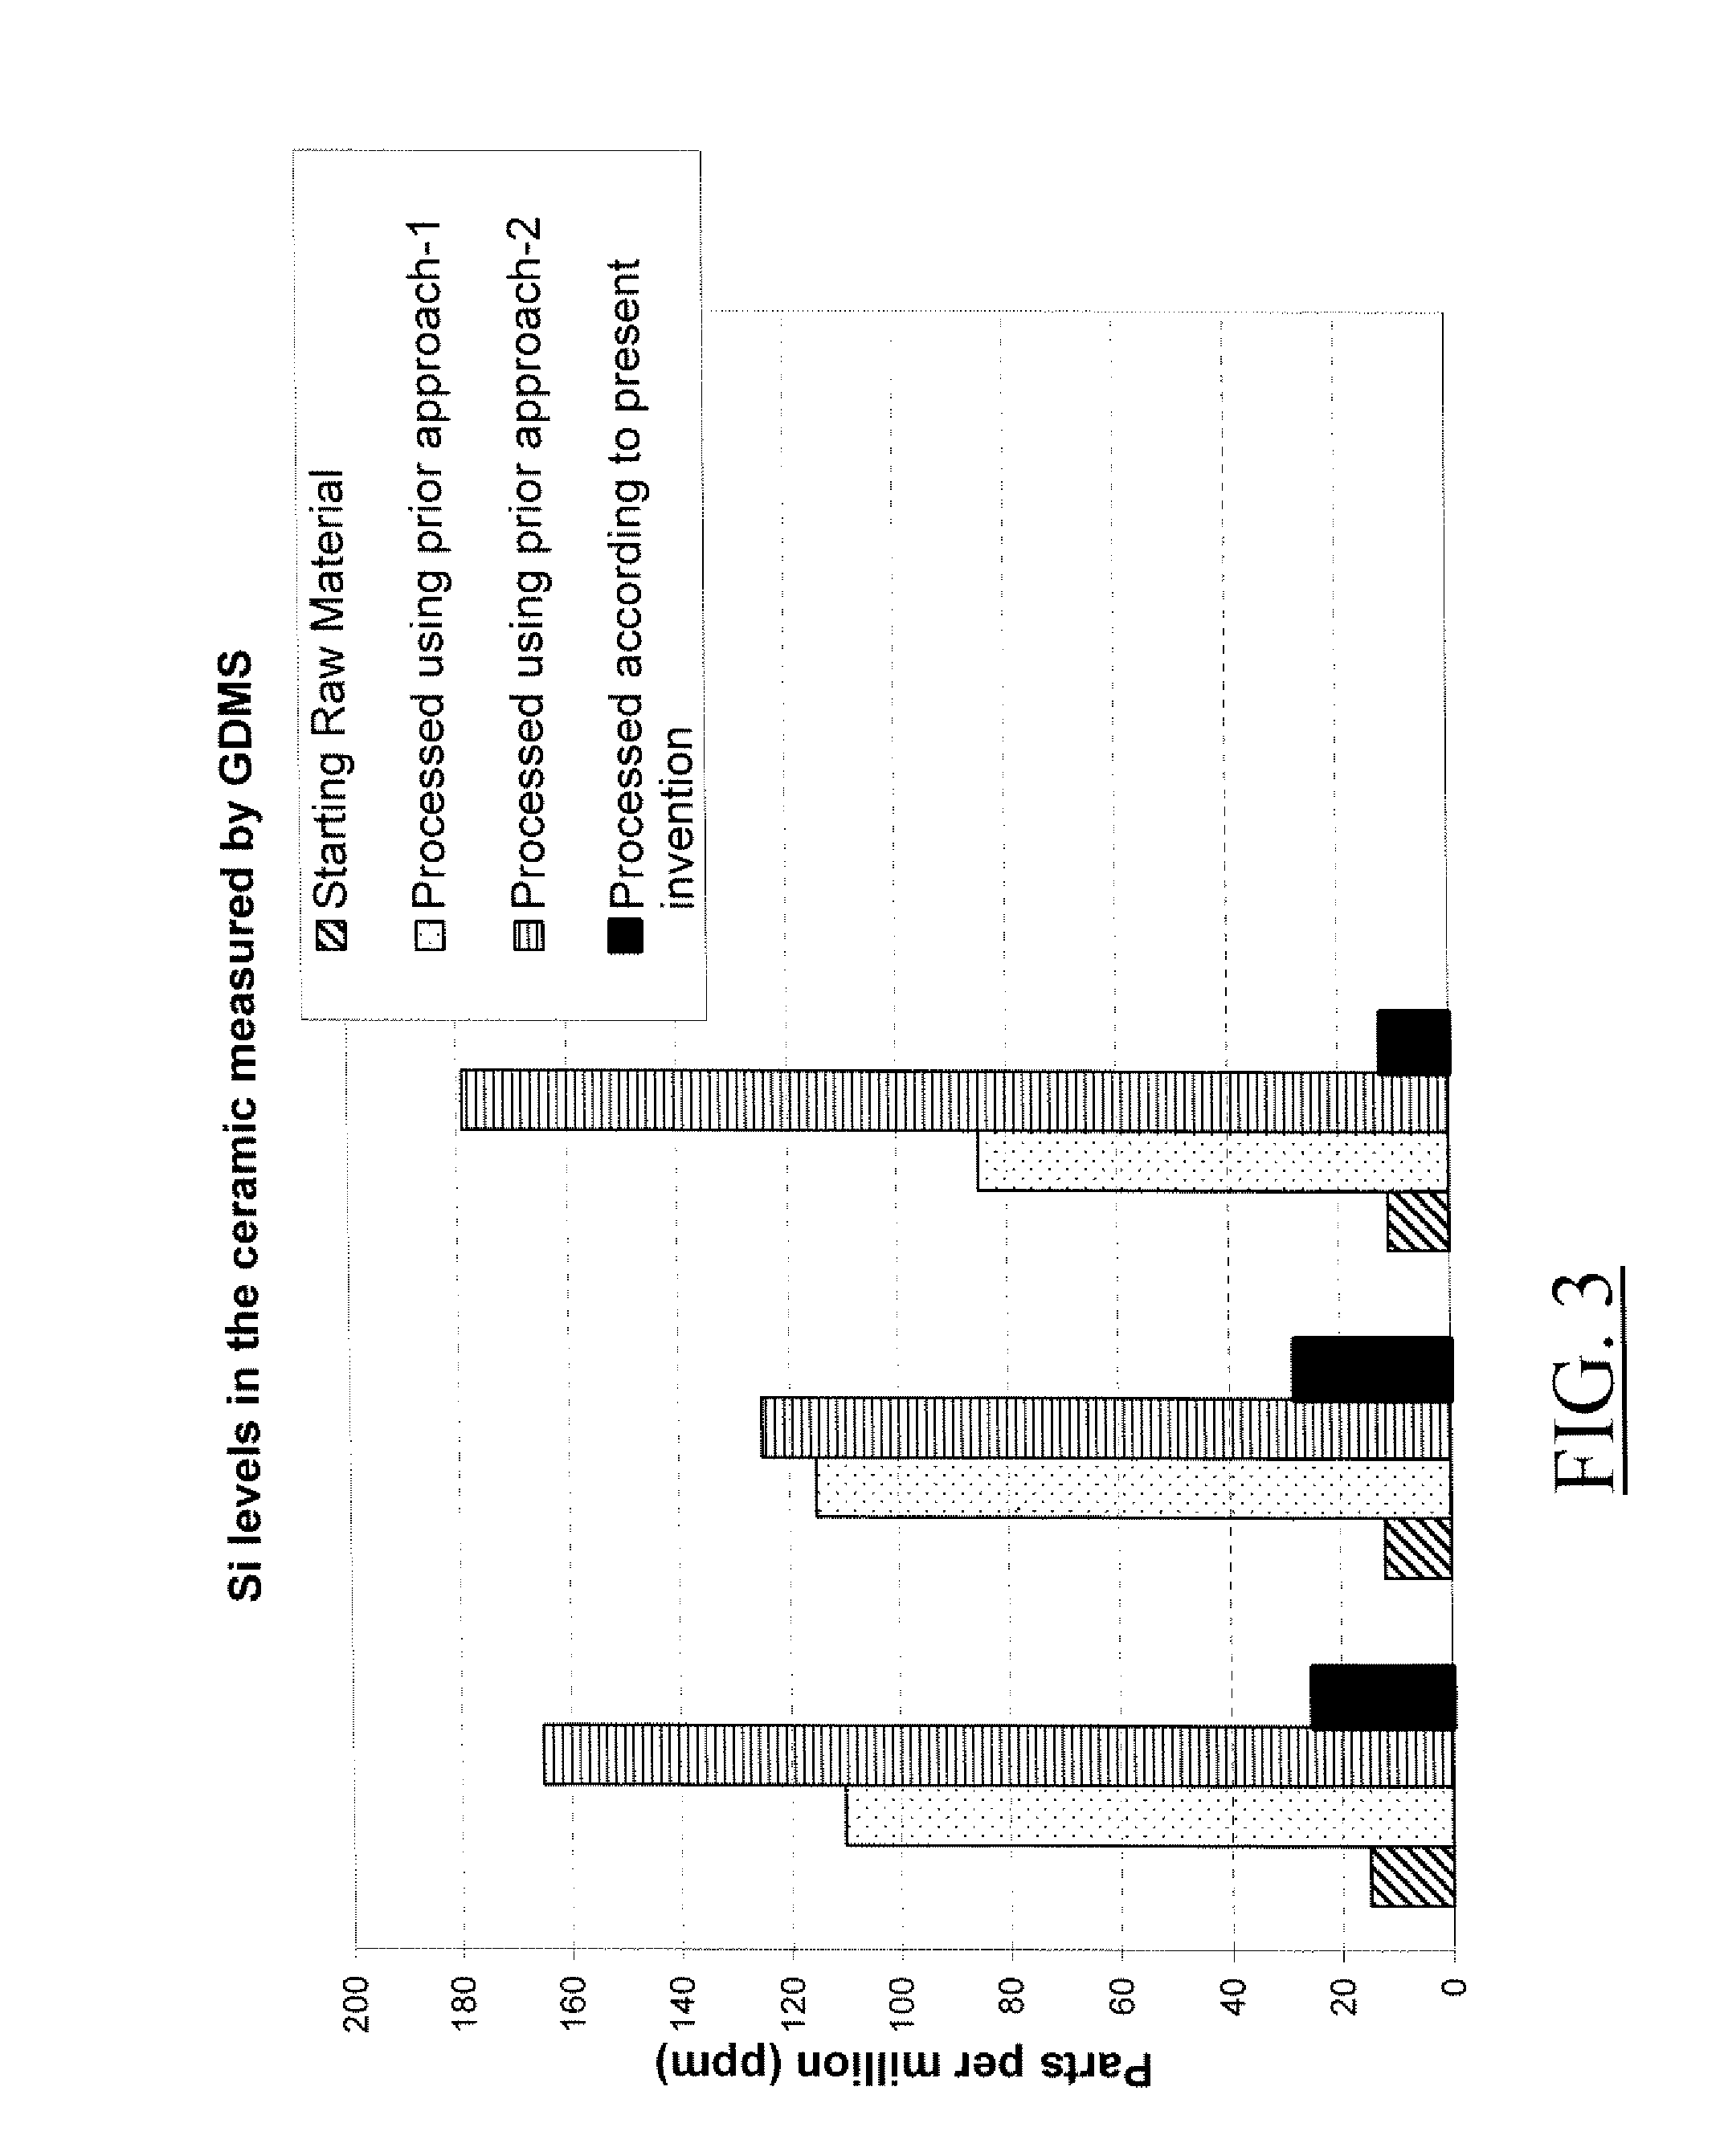 Method of making high purity polycrystalline aluminum oxynitride bodies useful in semiconductor process chambers